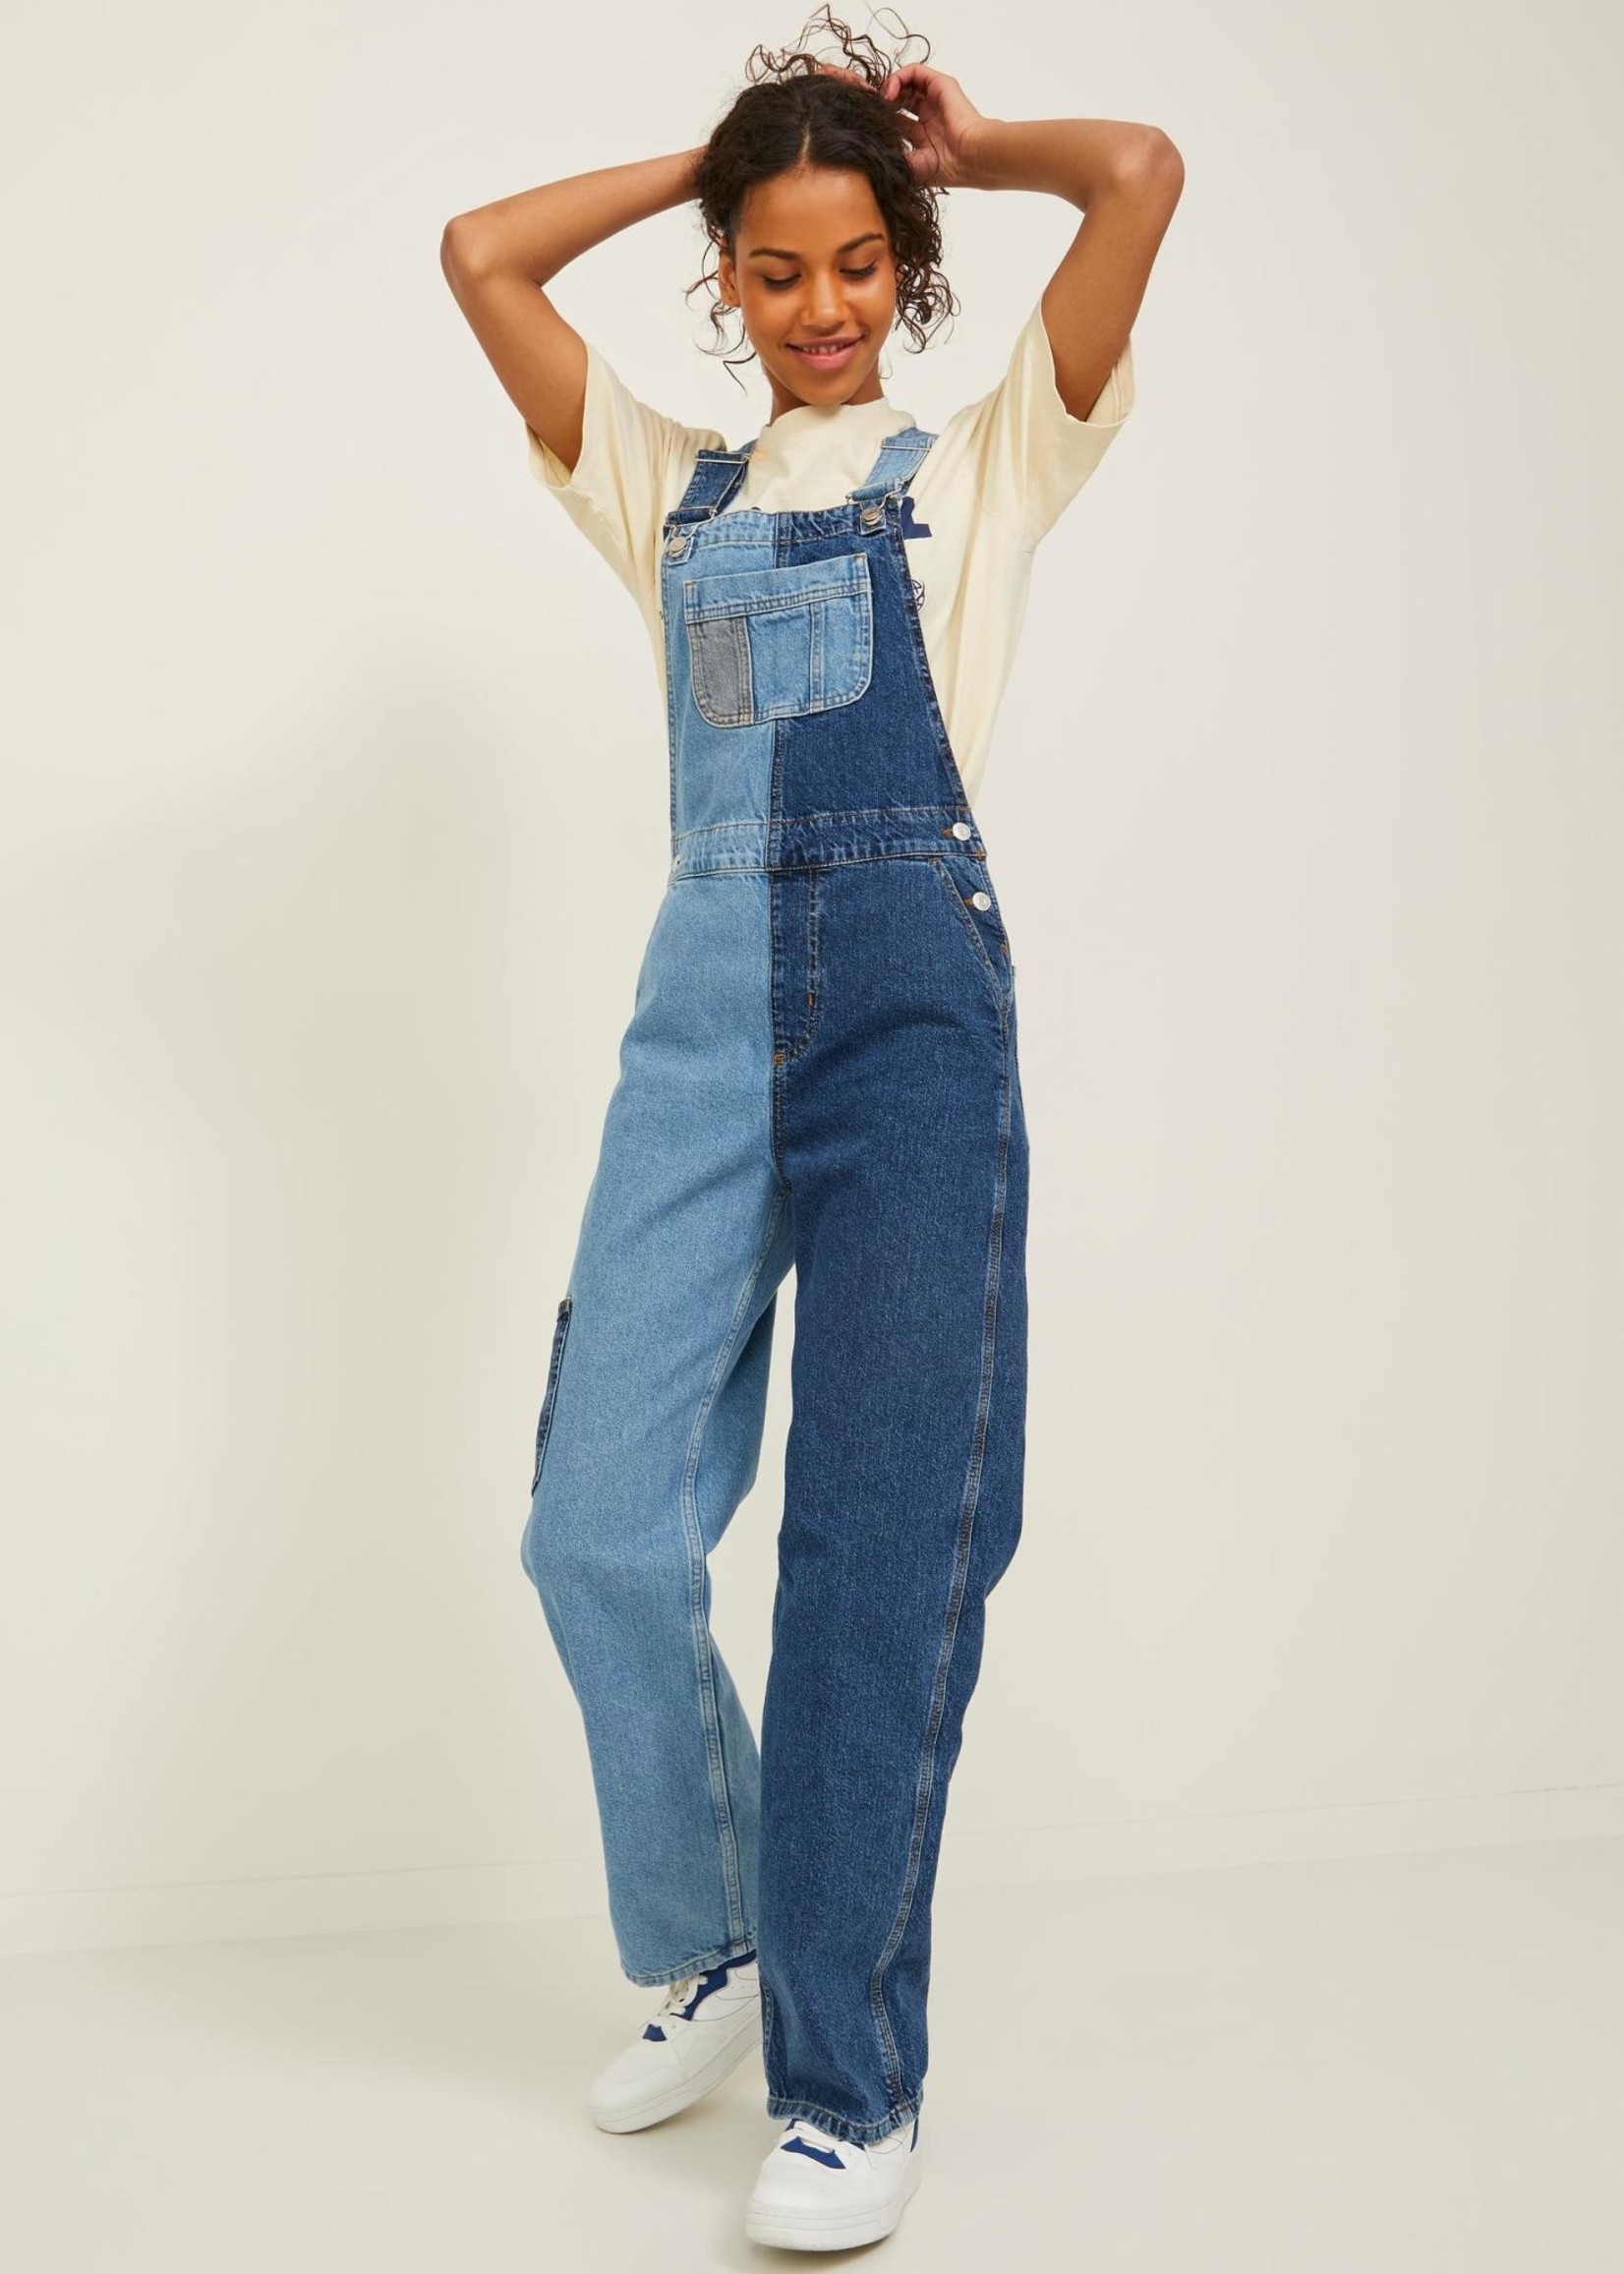 JXCALA TWO TONE OVERALL - MED BLUE